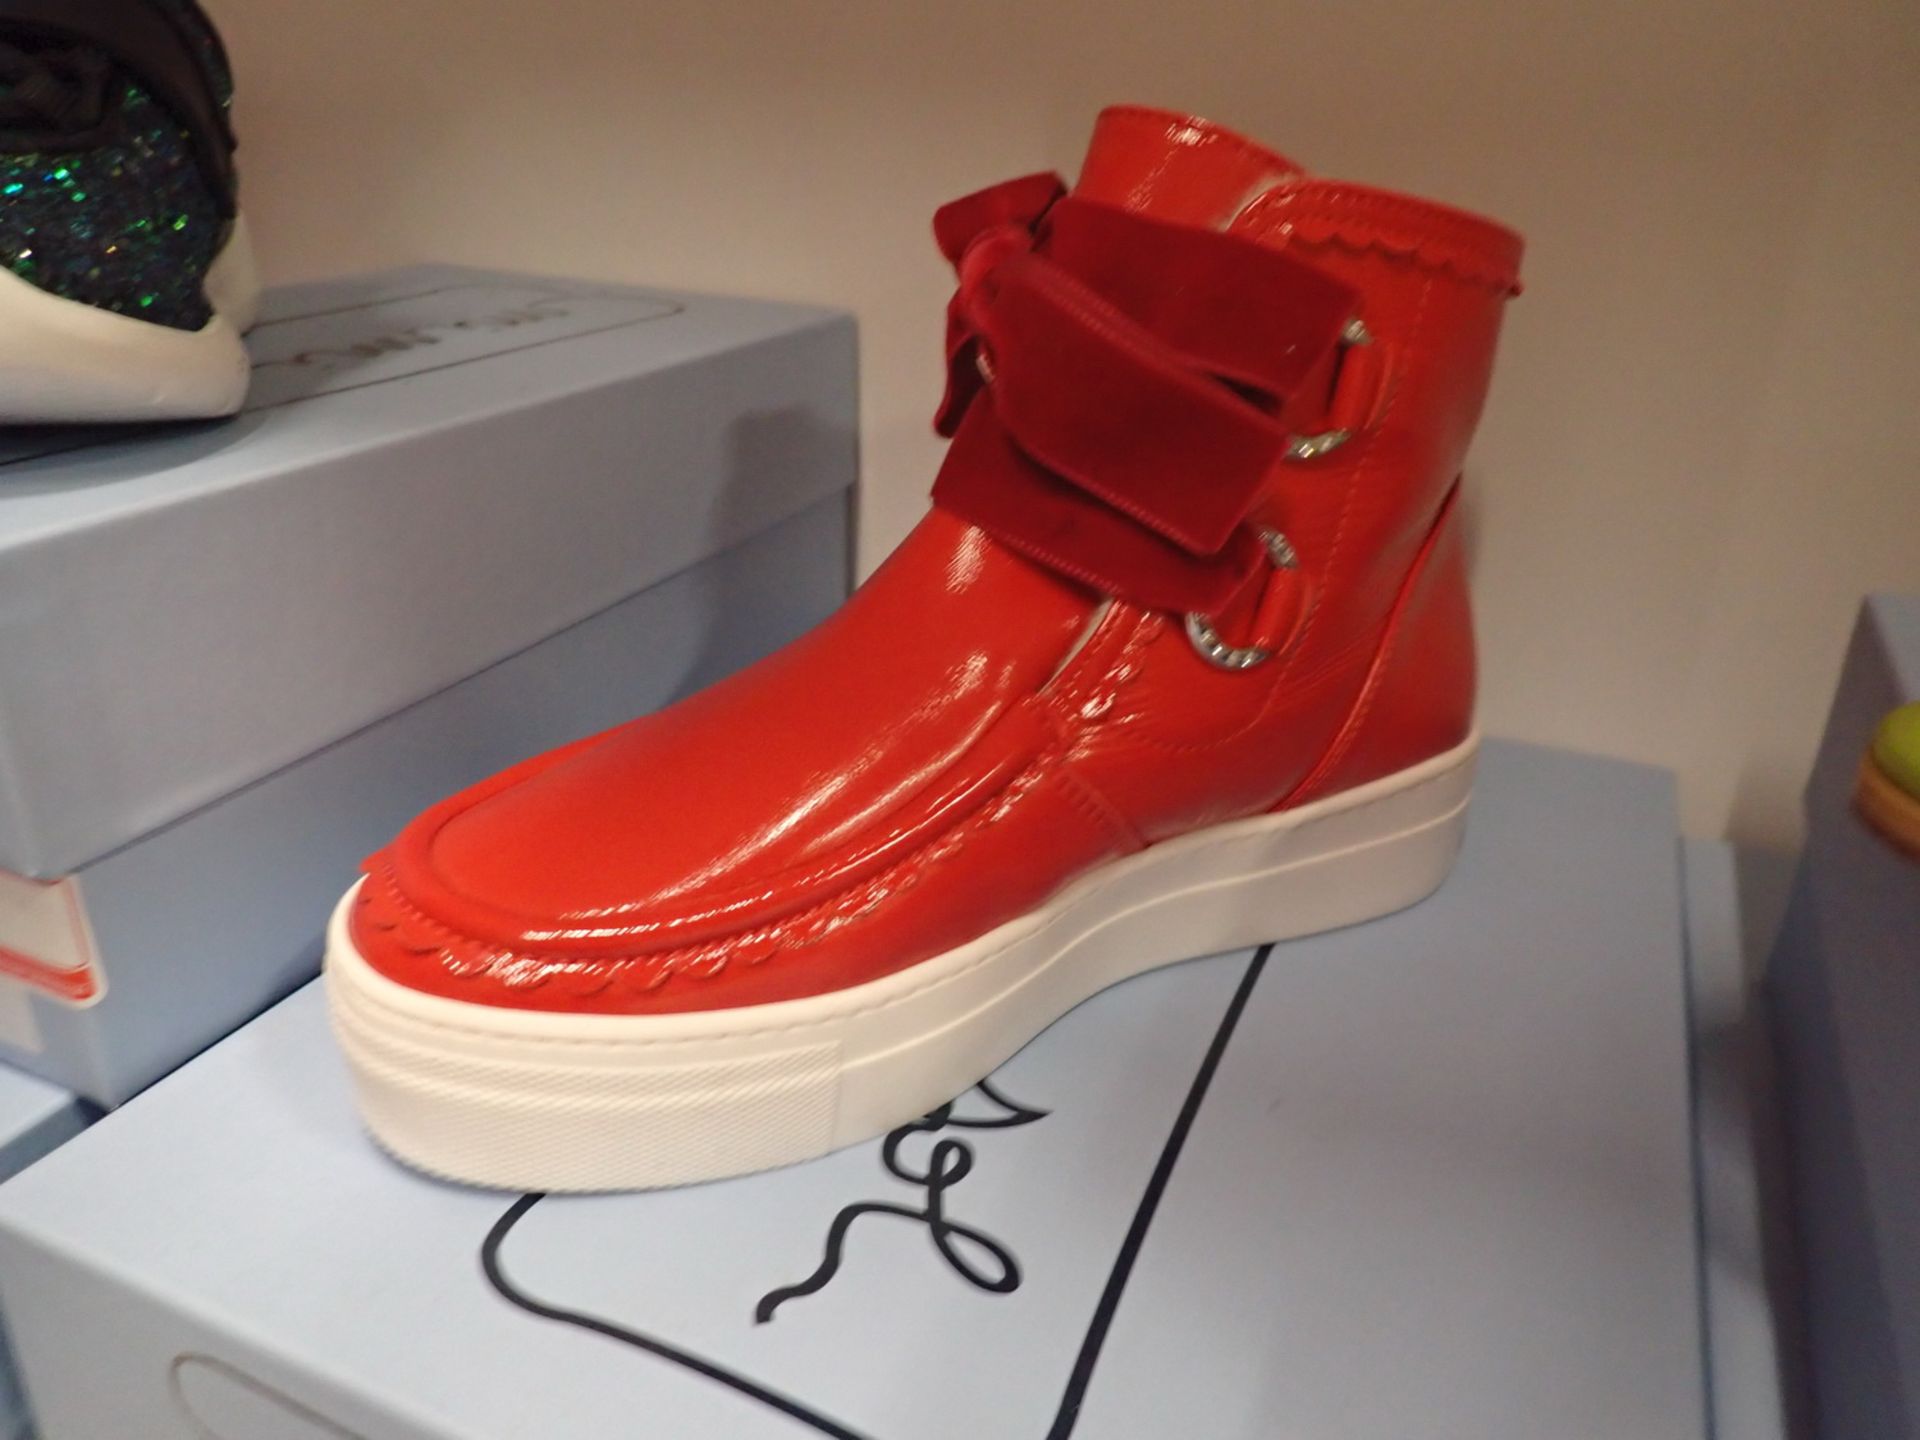 PAIRS - MIMISOL RED BOOTS